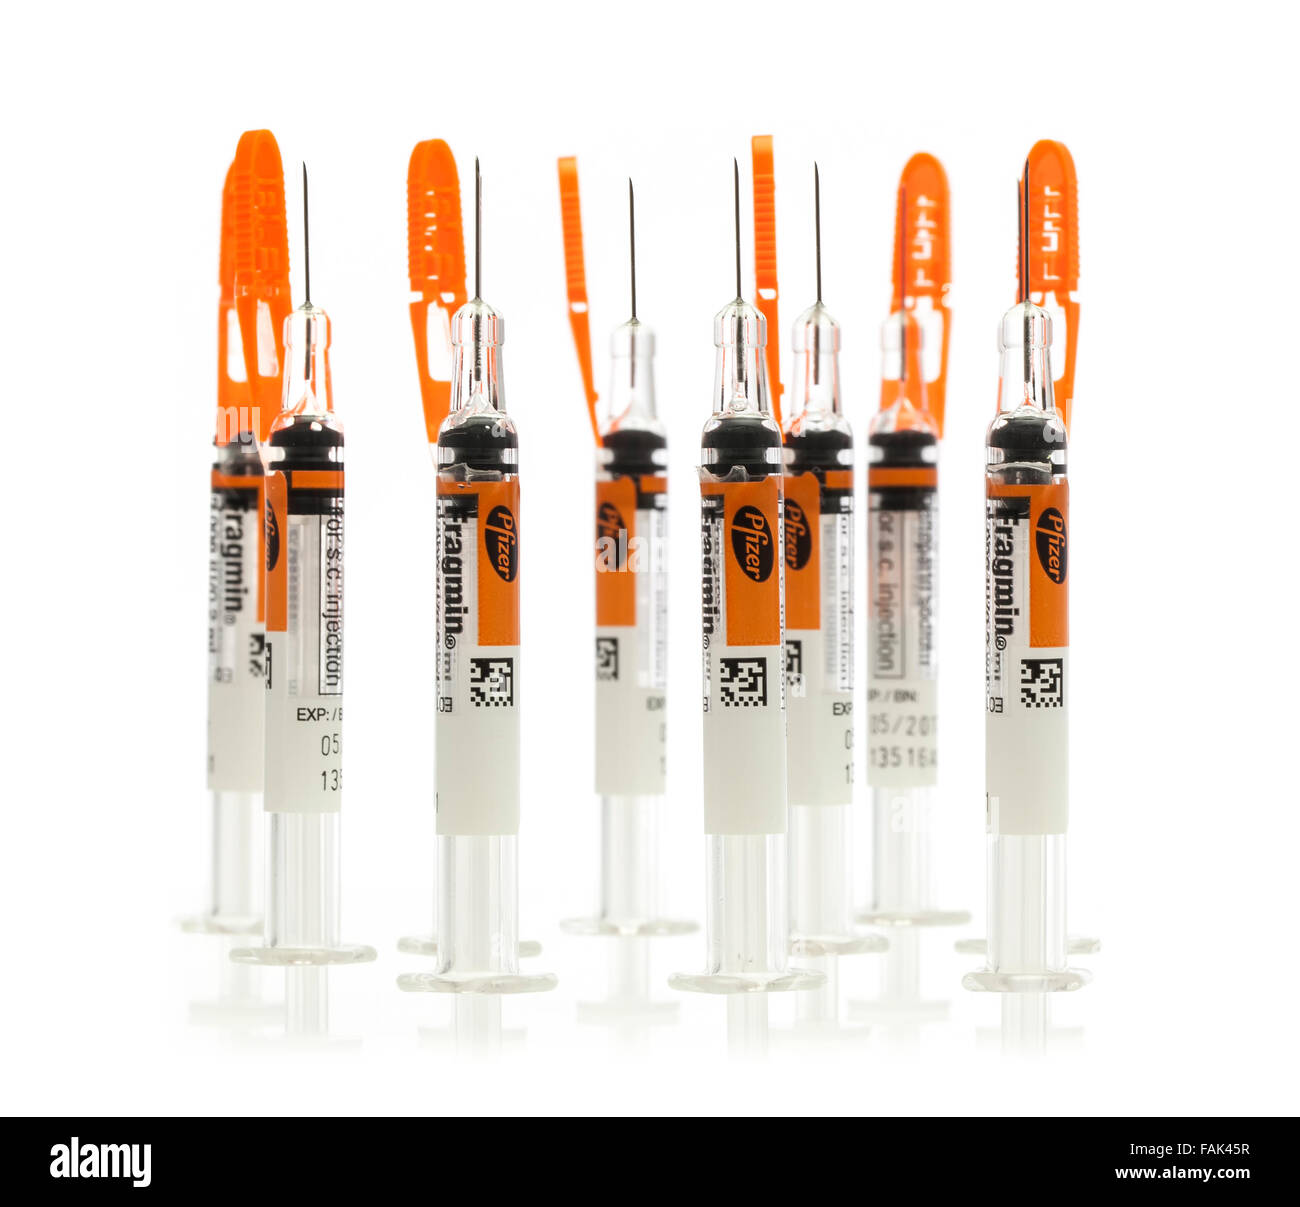 Collection of Single Dose Syringes from Pfizer on a White Background Stock Photo